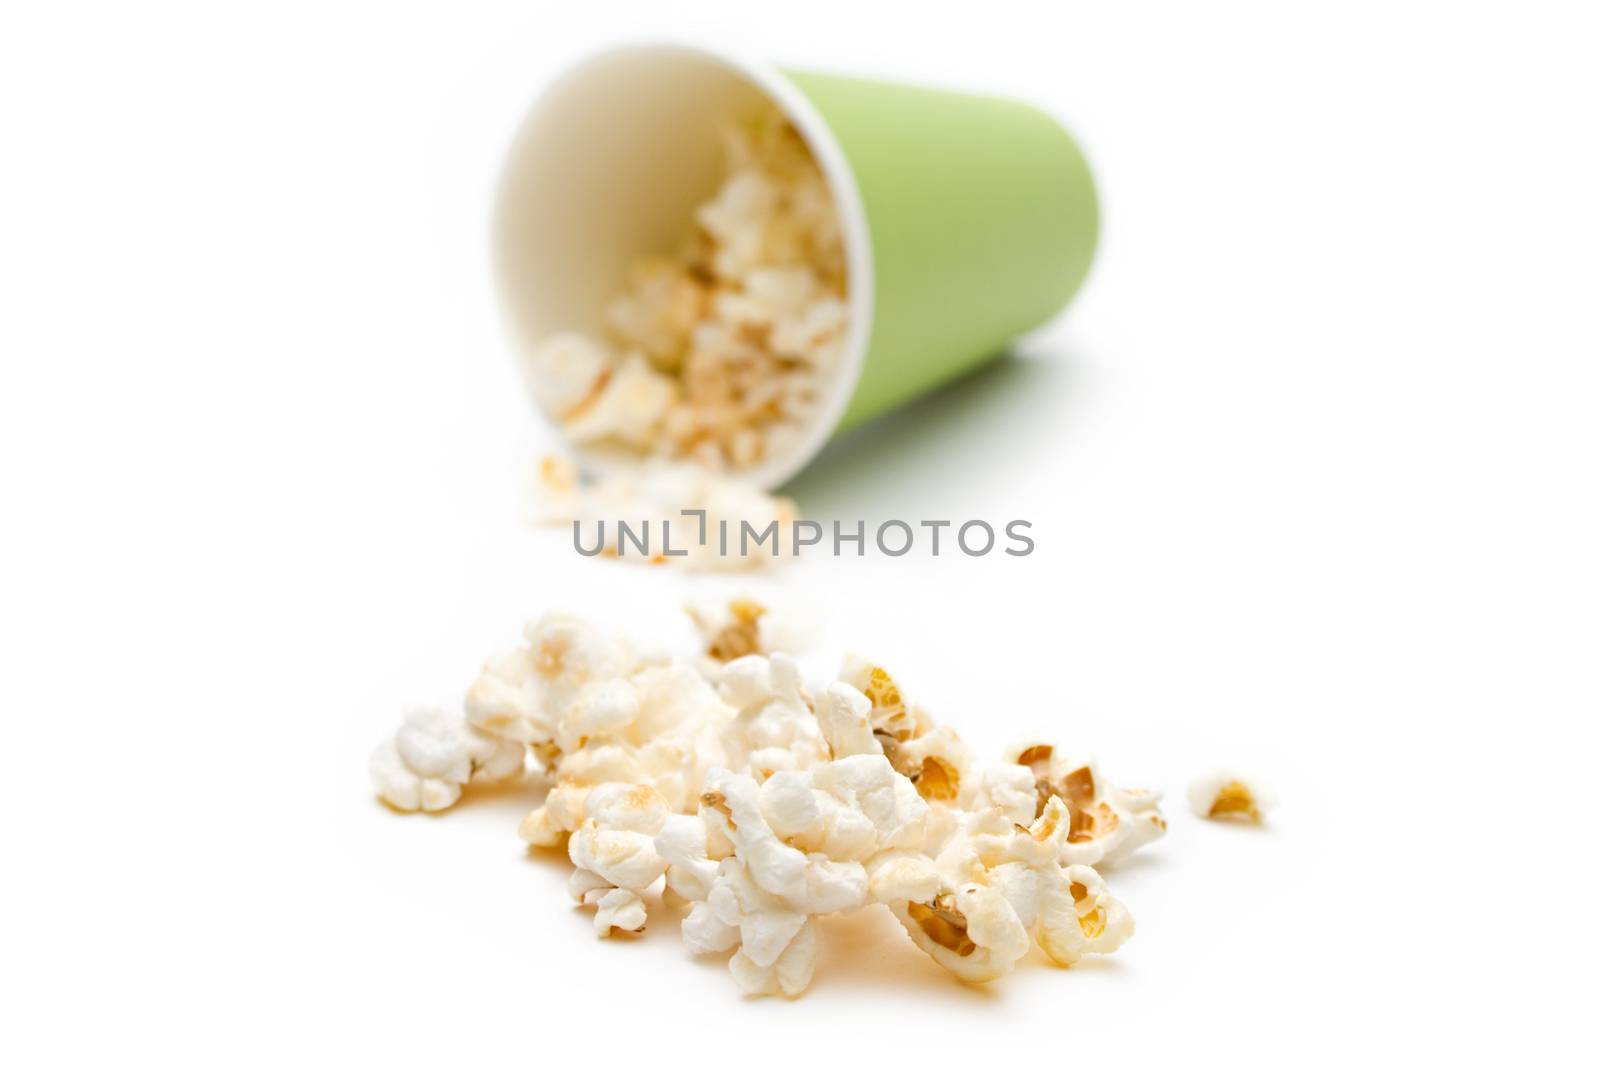 Popcorn in a green paper cup